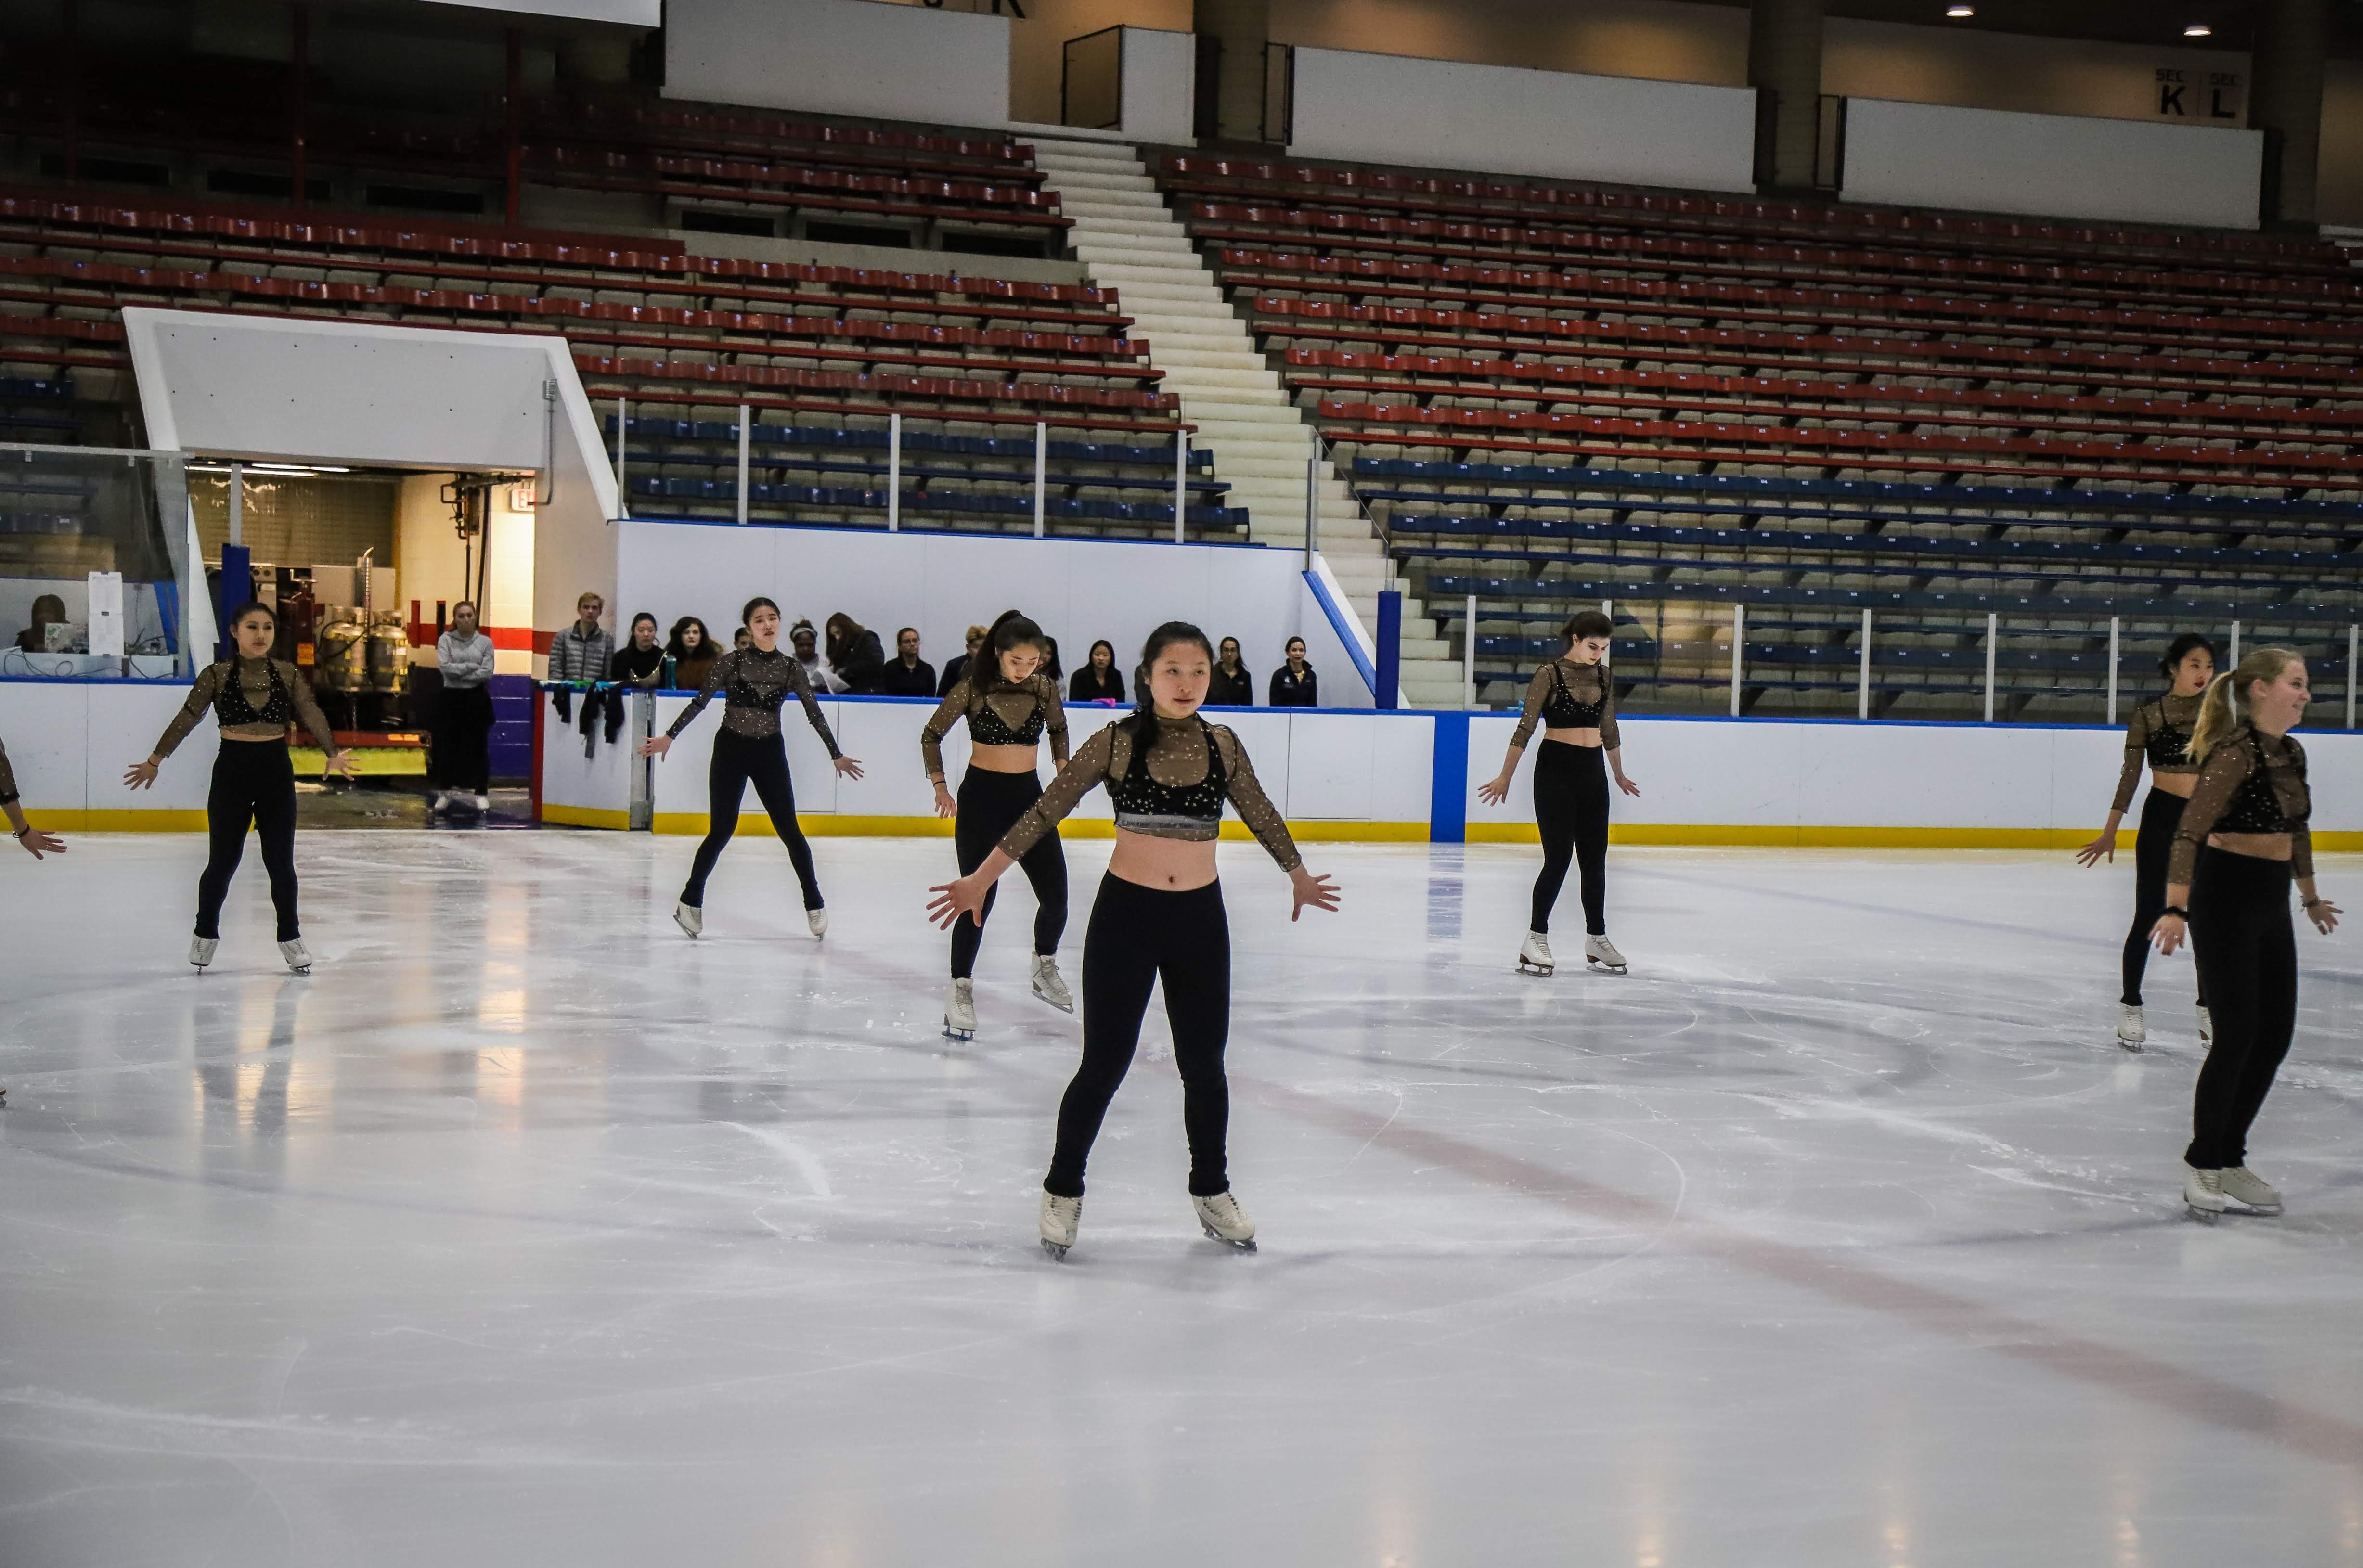 A team of ice skaters wearing sparkly costumes in formation